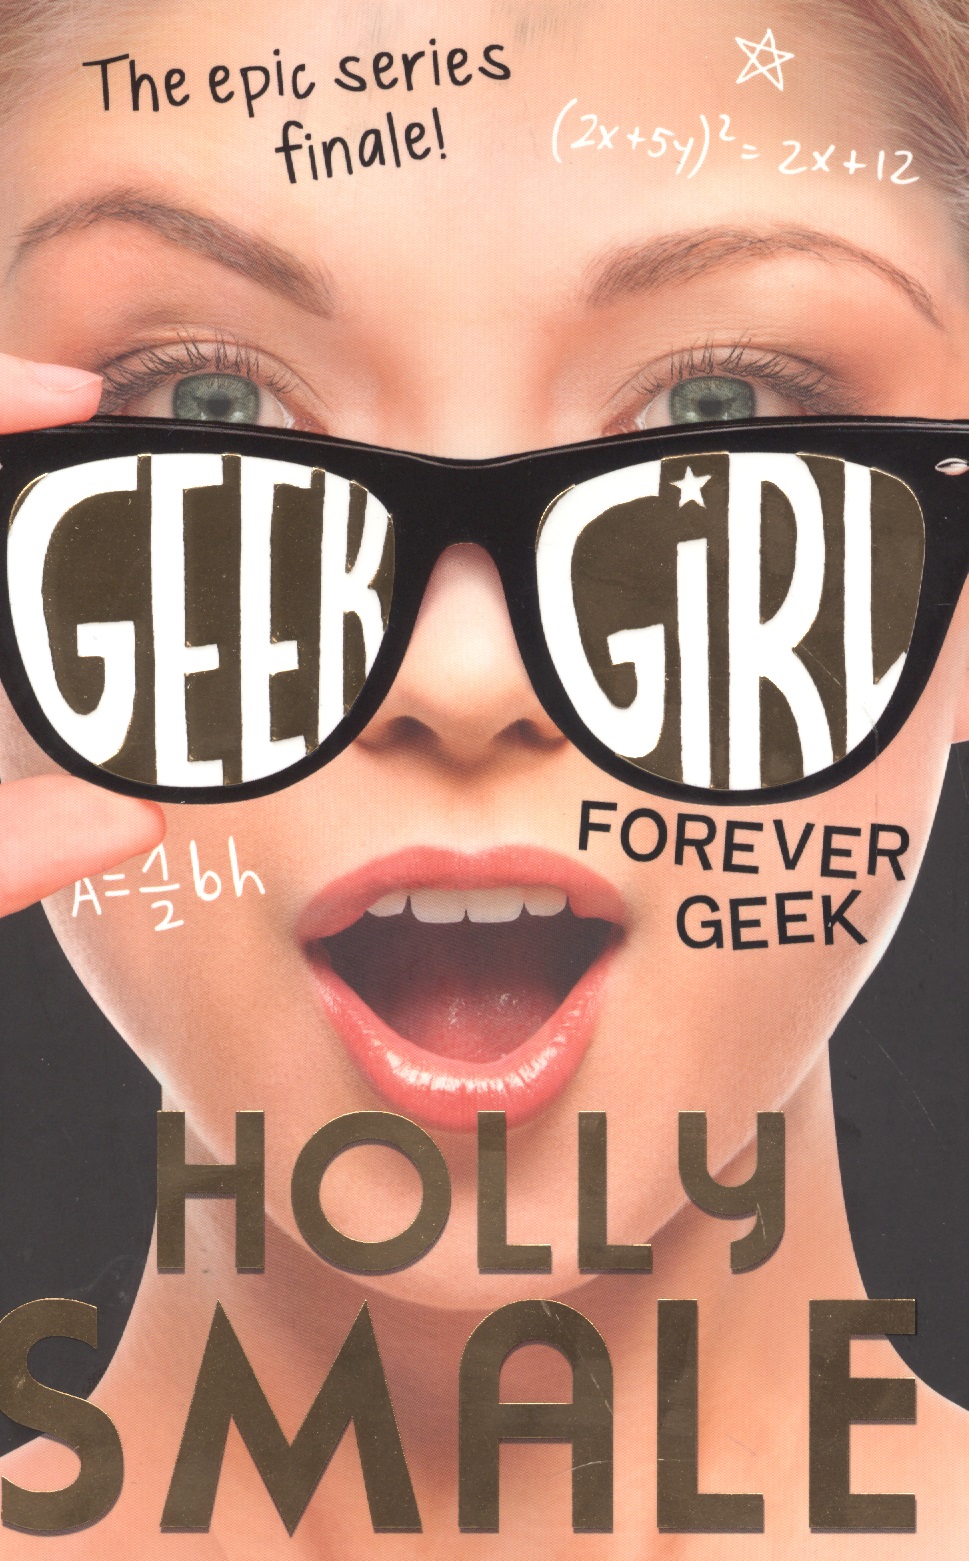 Smale Holly Forever Geek (Geek Girl, Book 6) (м) Smale smale holly model misfit